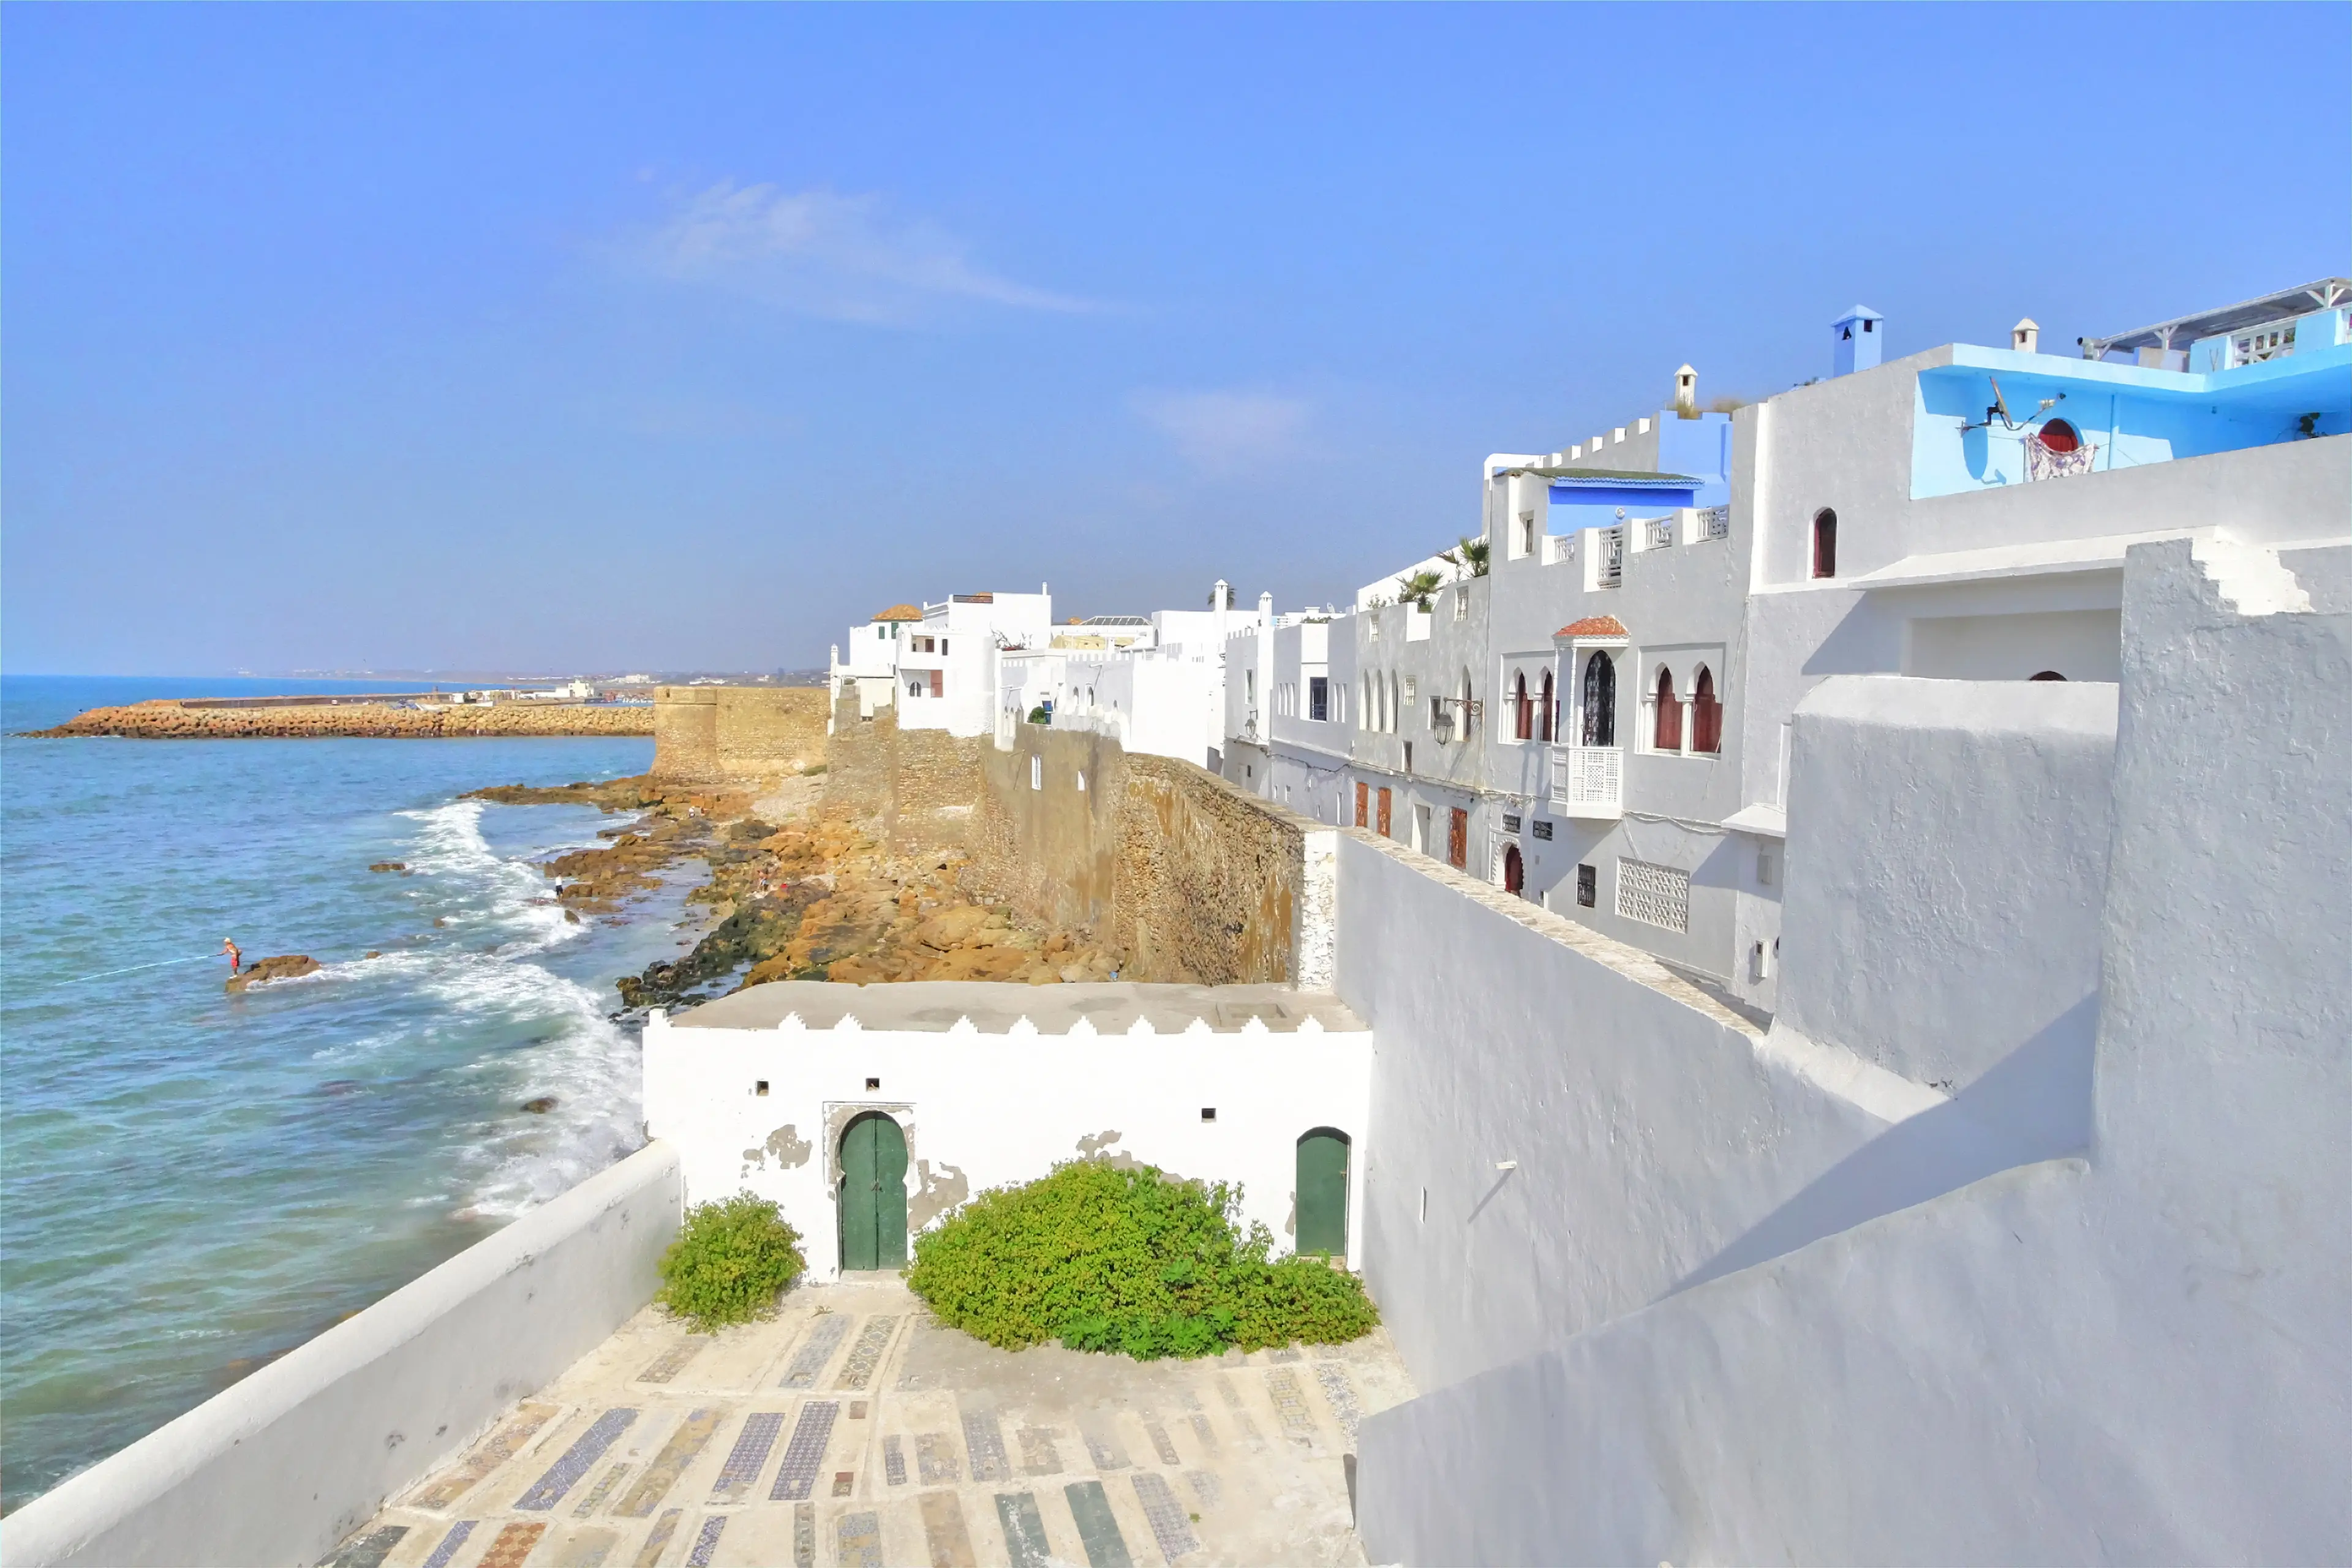 1-Day Family Adventure: Sightseeing and Shopping in Asilah, Morocco